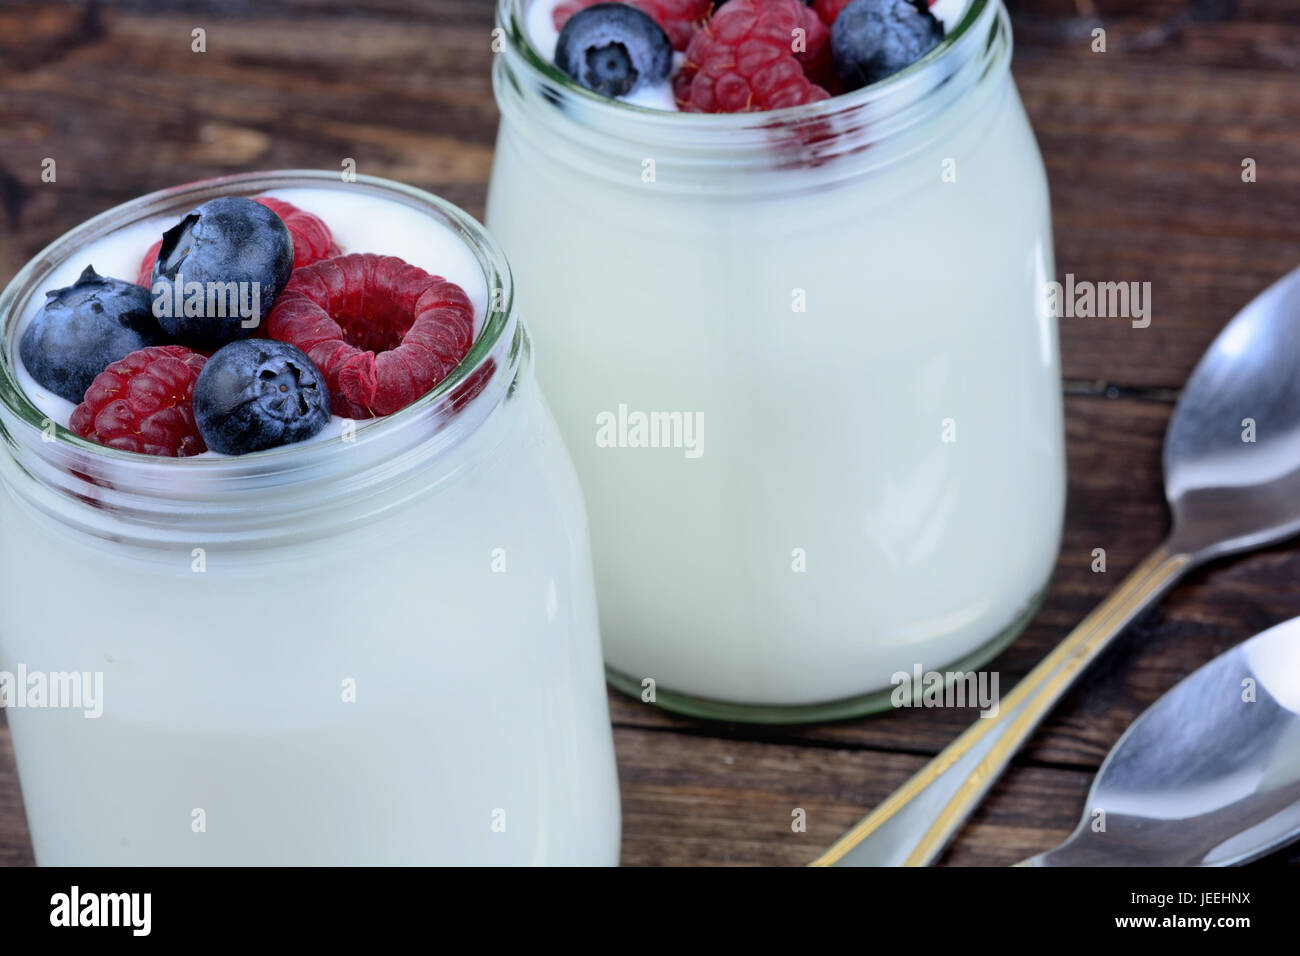 Yogurt with berries in a jars glass on table Stock Photo